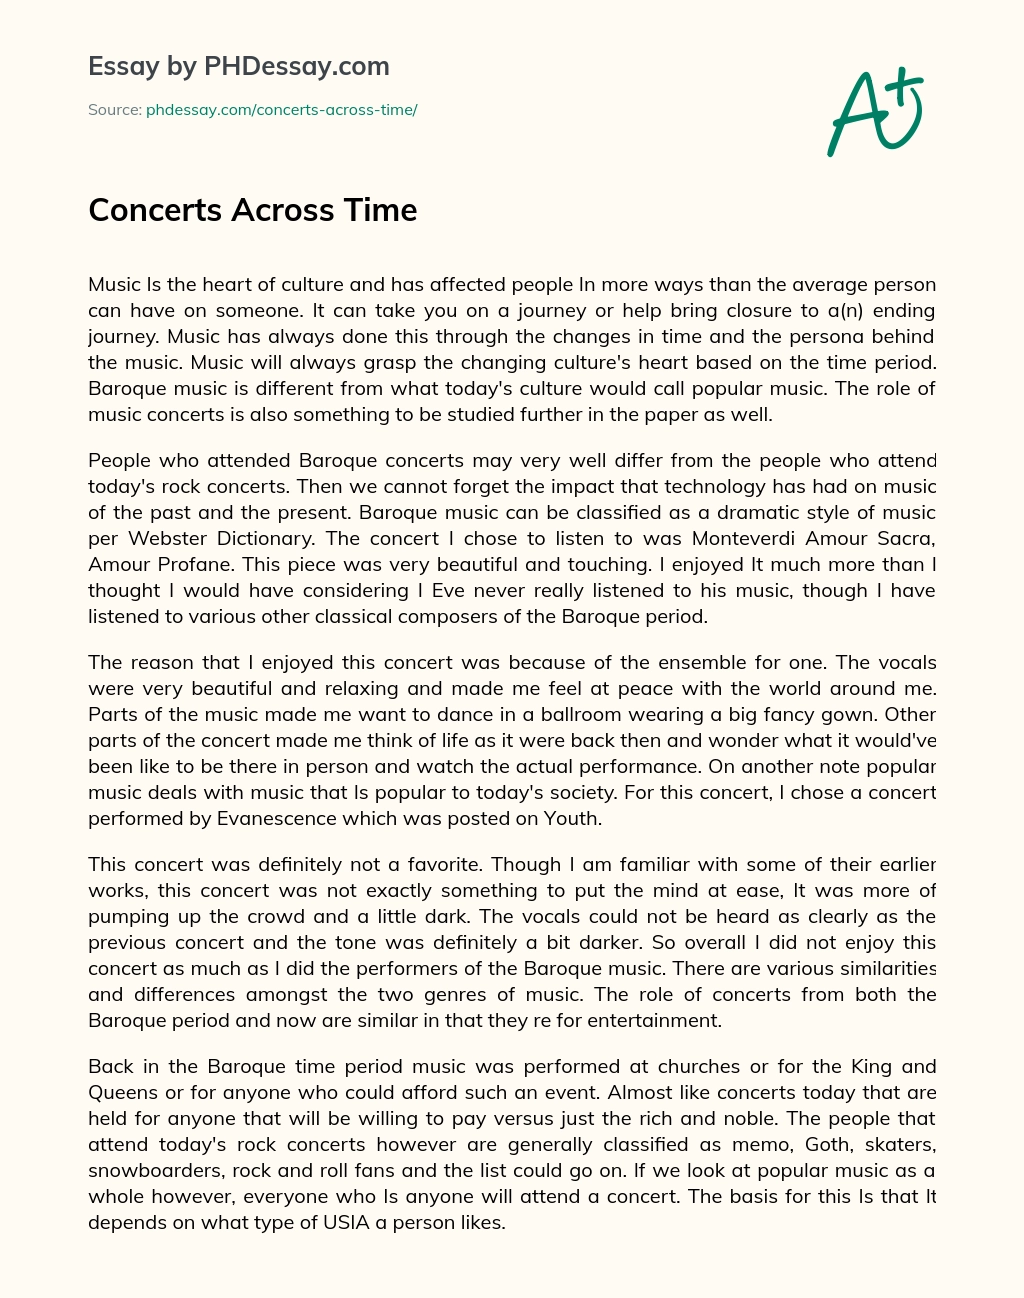 Concerts Across Time essay